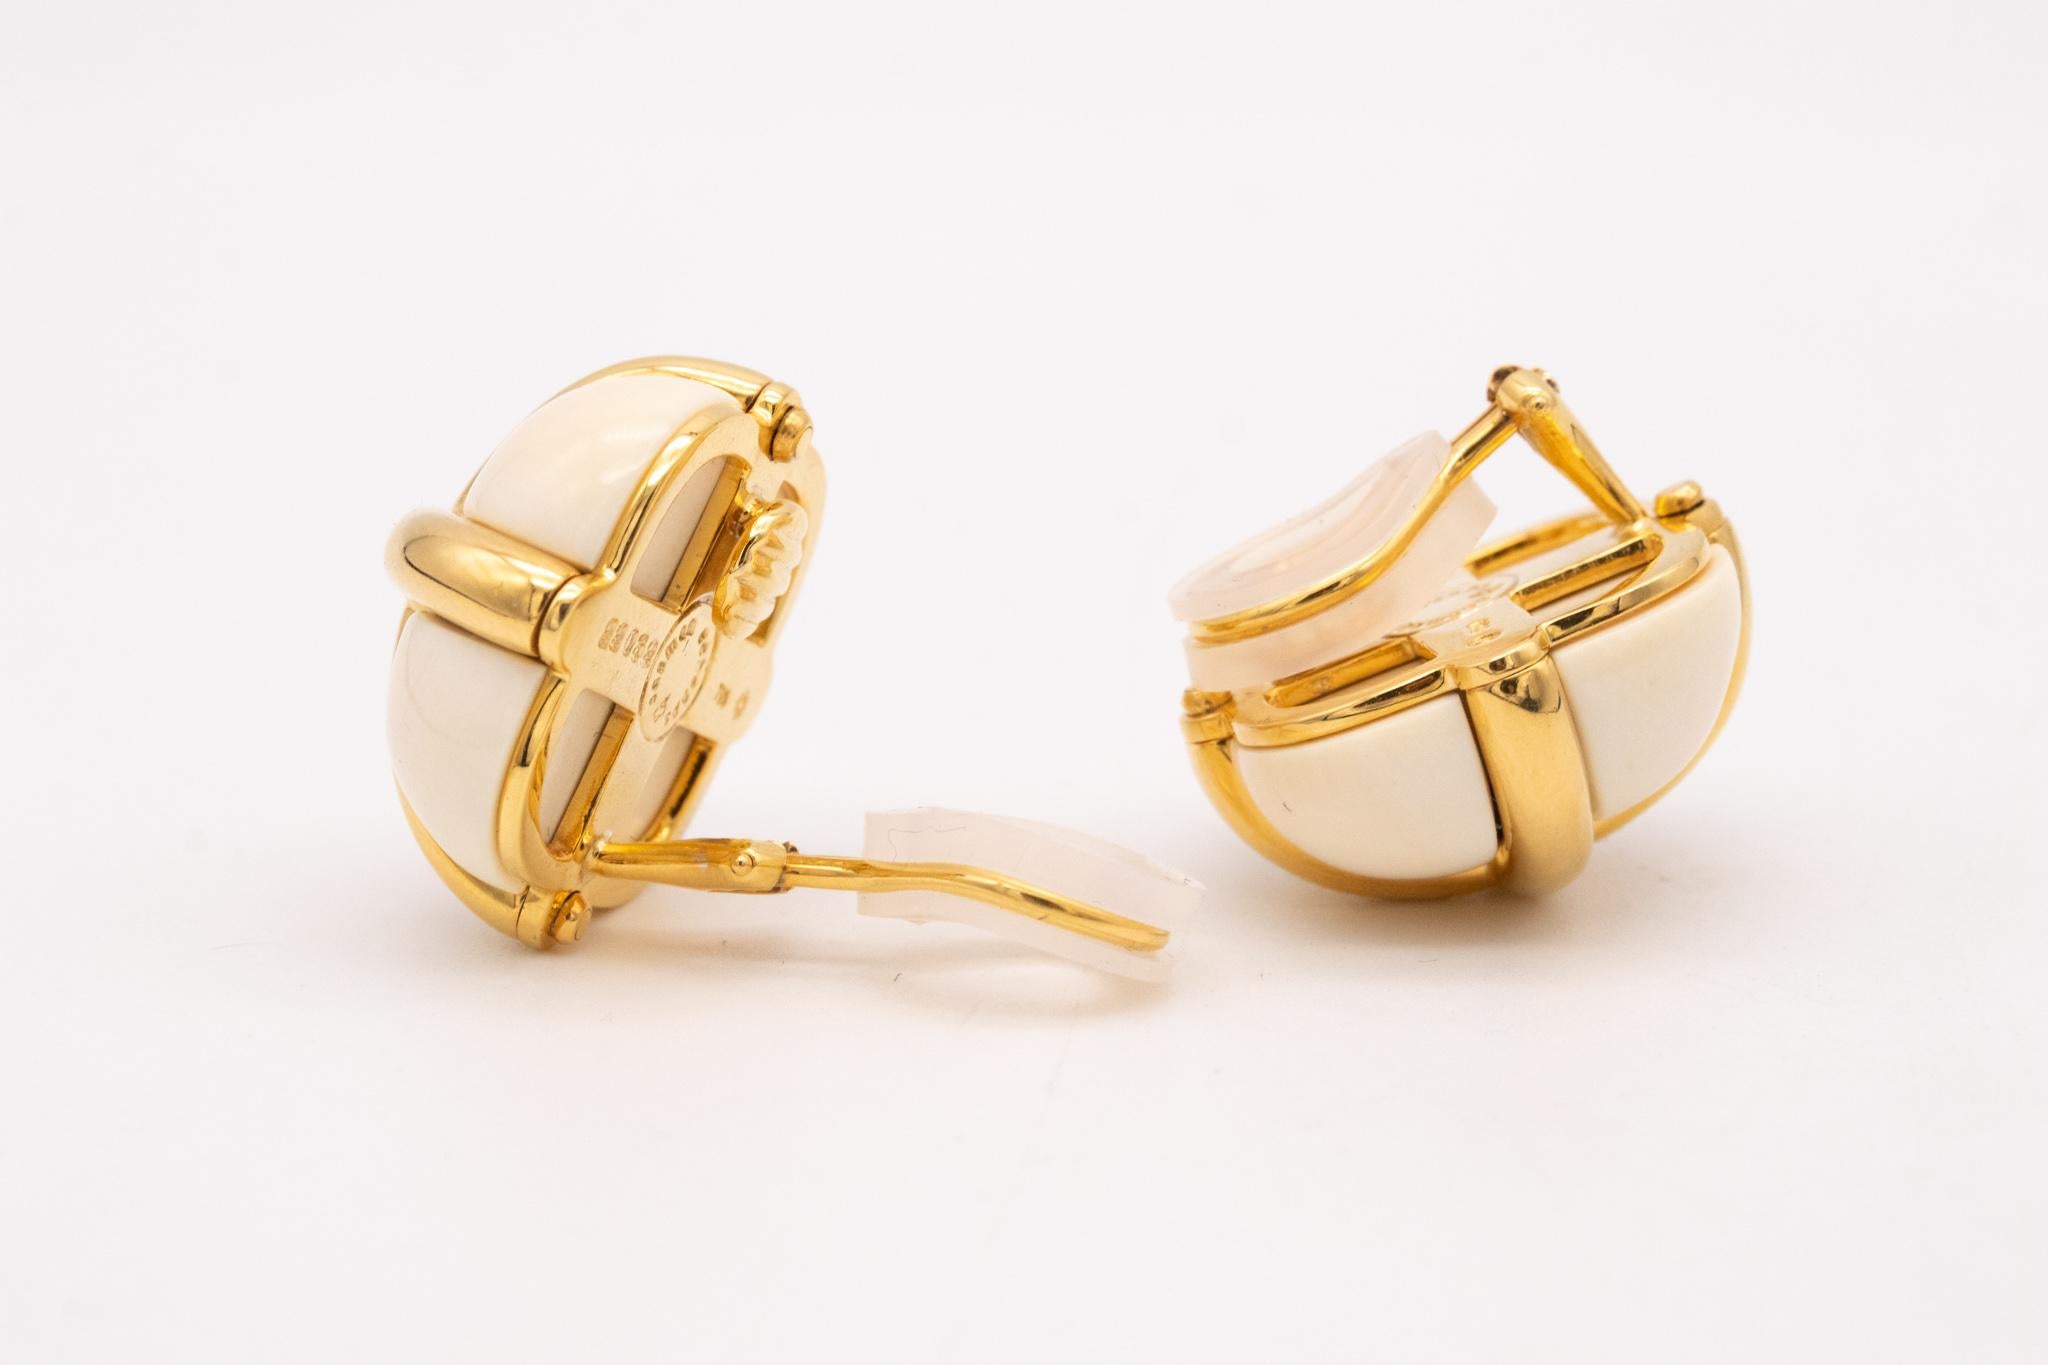 Modernist Seaman Schepps Rare 18Kt Yellow Gold Ear Clips With Caged Cacholong White Agate